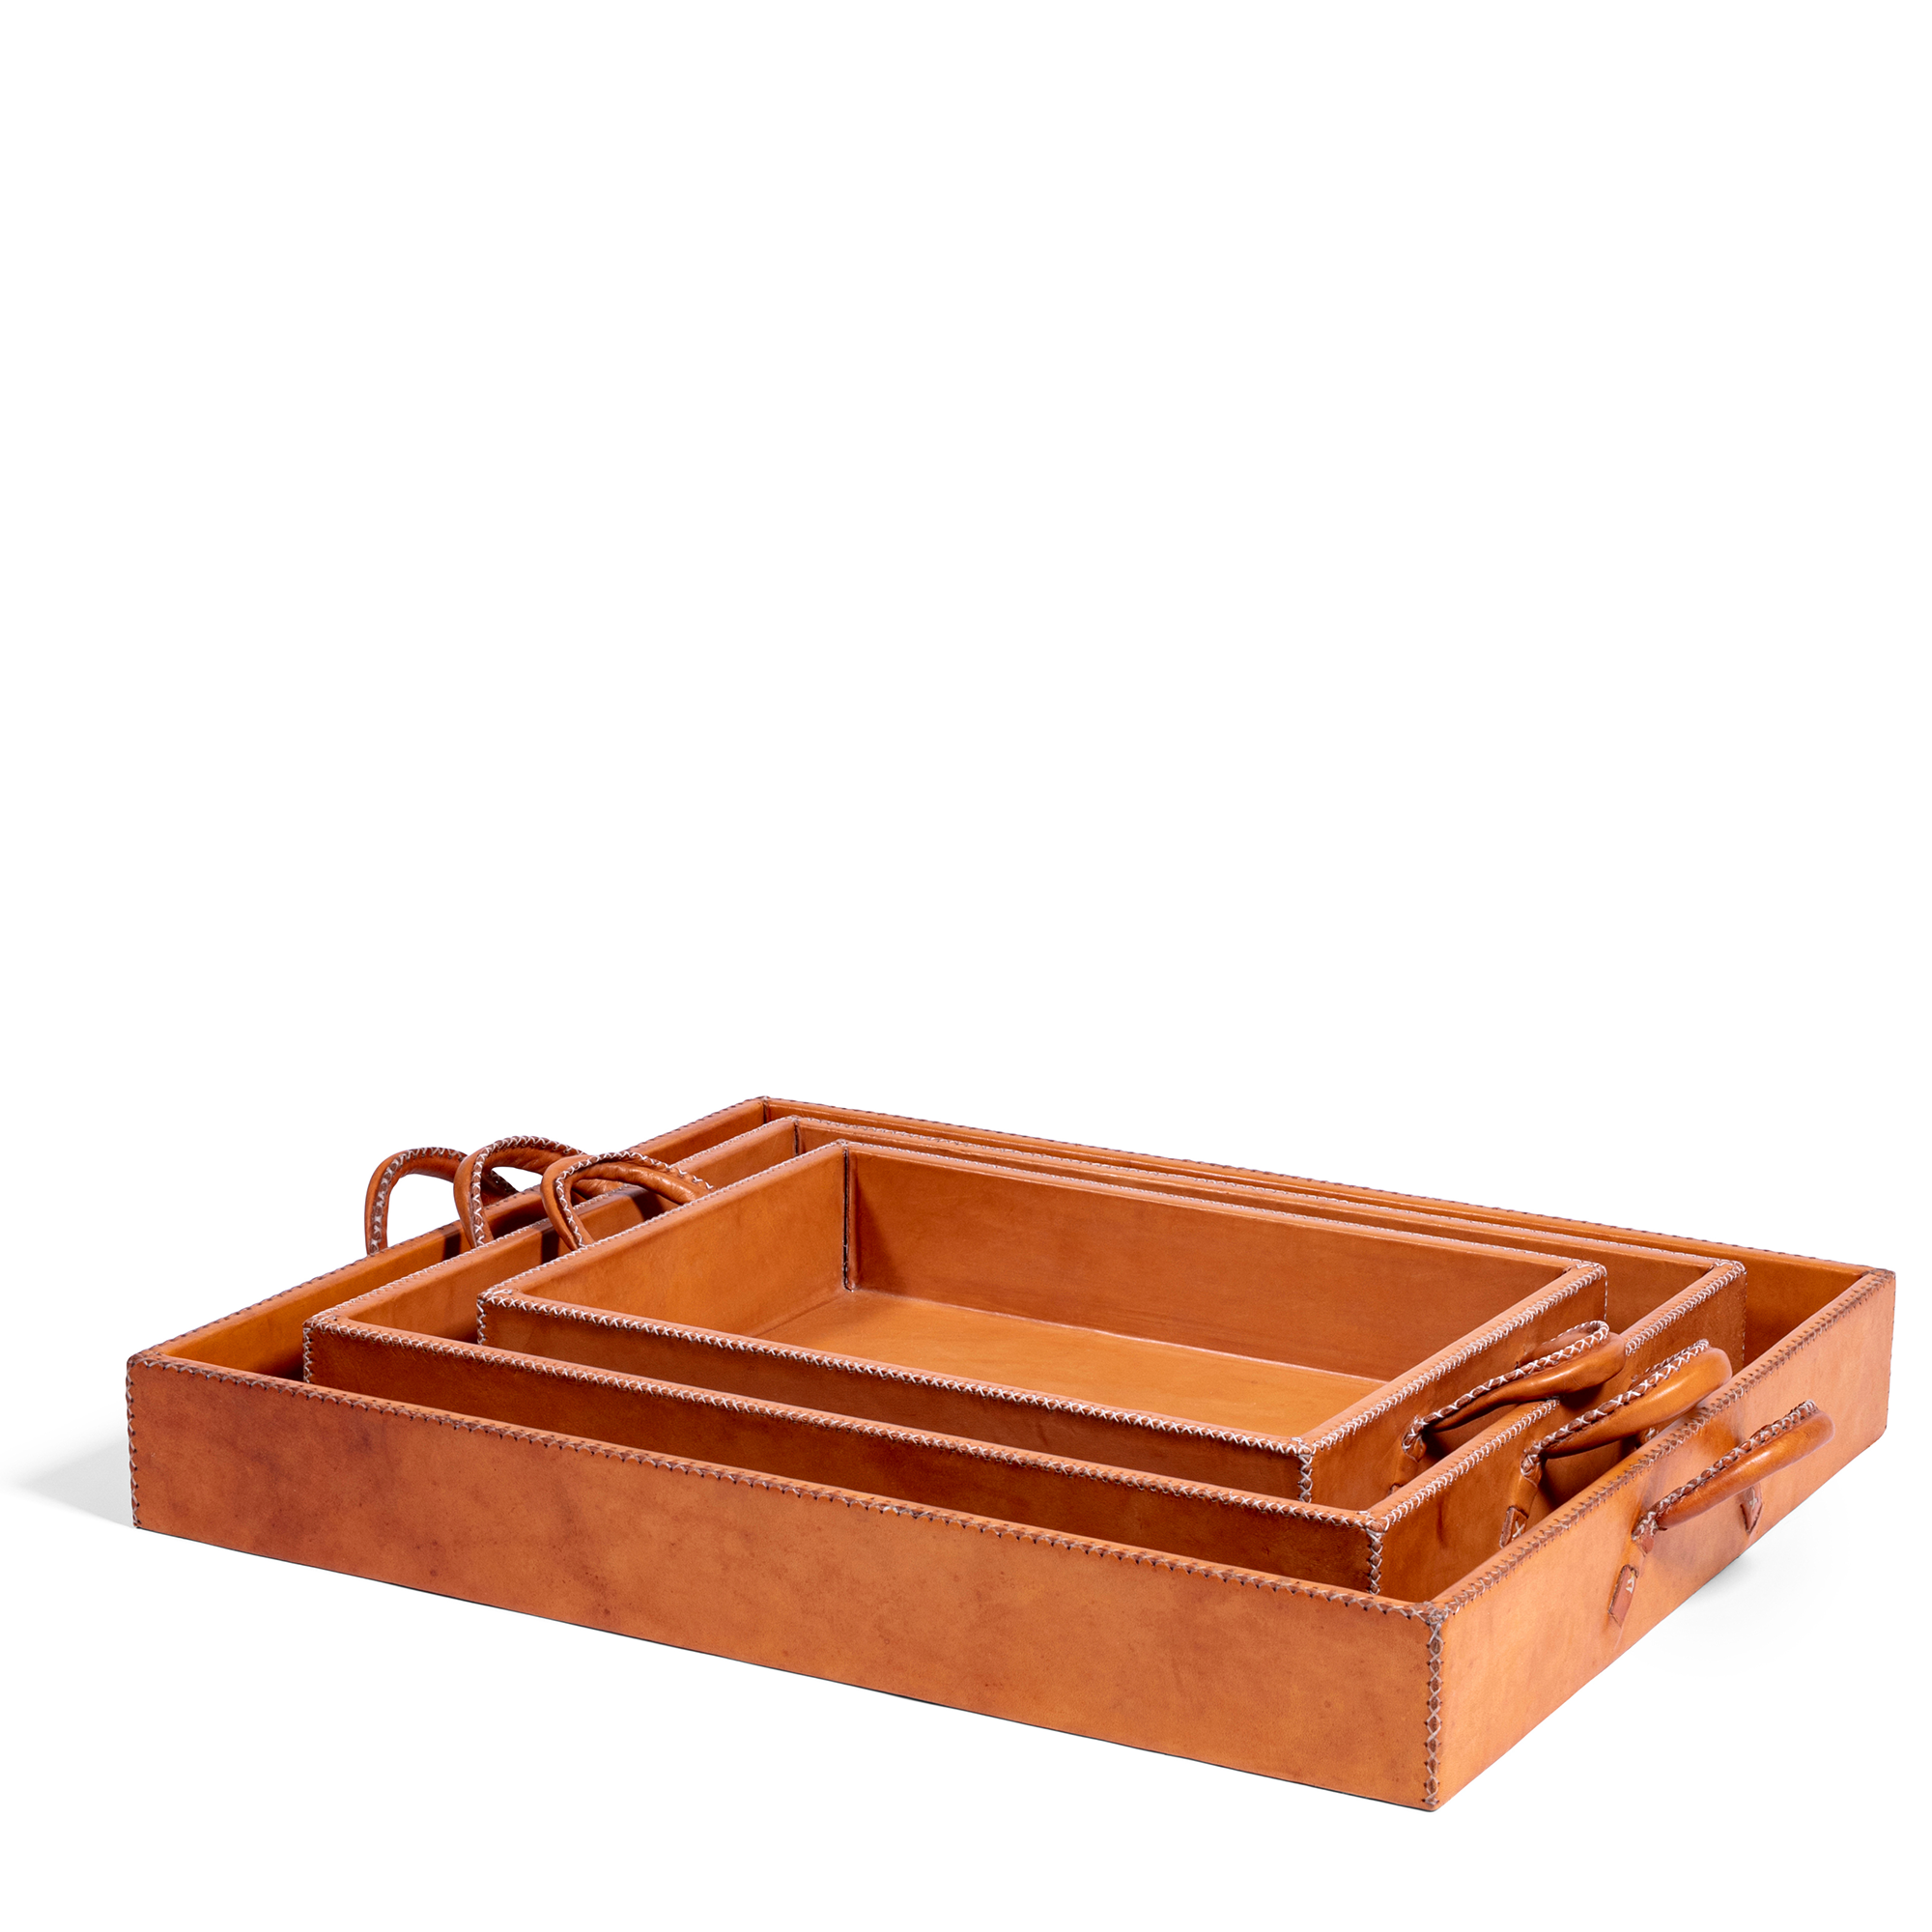 Handled Leather Tray - Natural